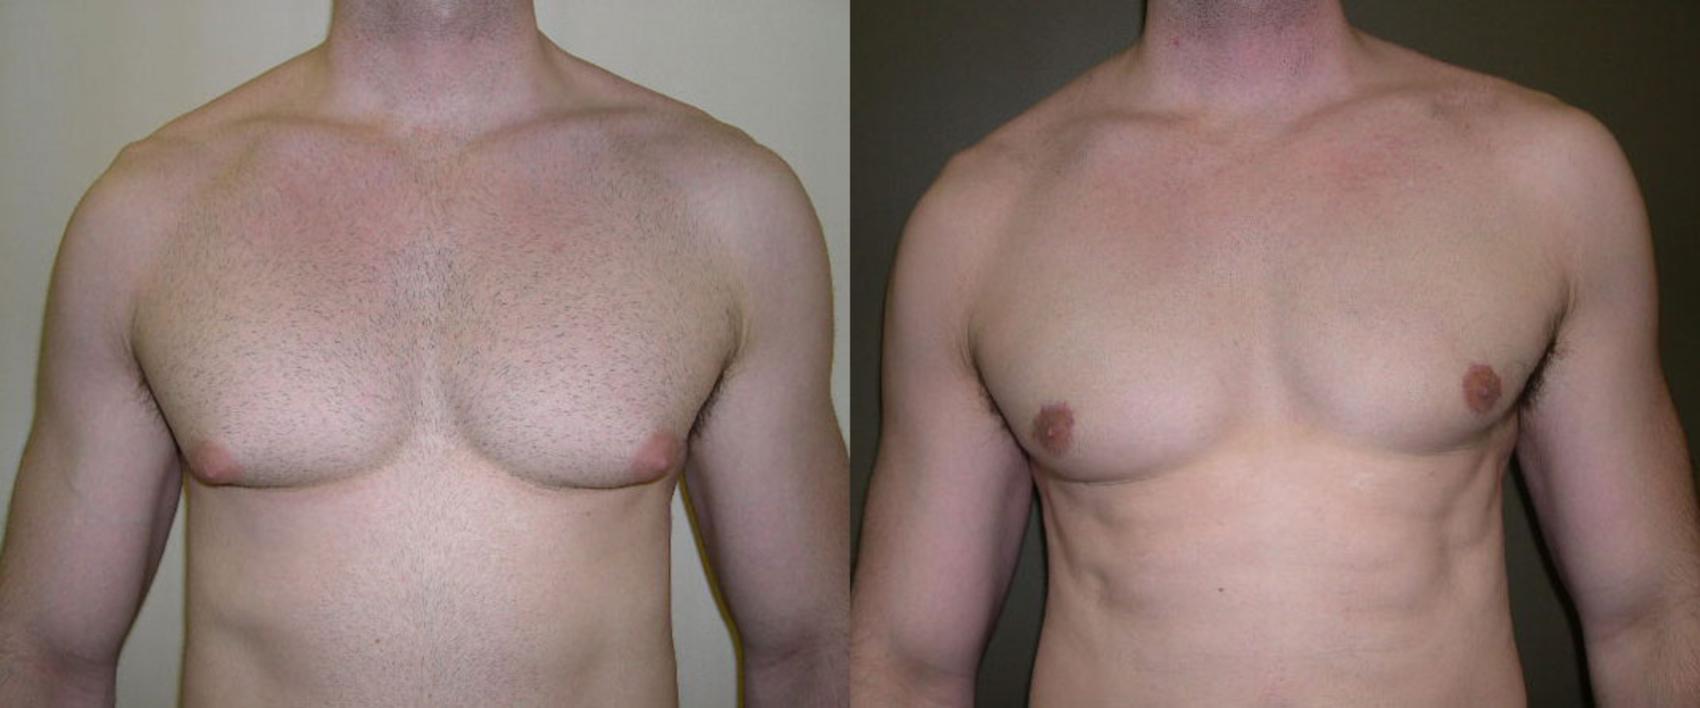 Male Breast Reduction Before & After Photo | Atlanta, GA | Plastic Surgery Center of the South